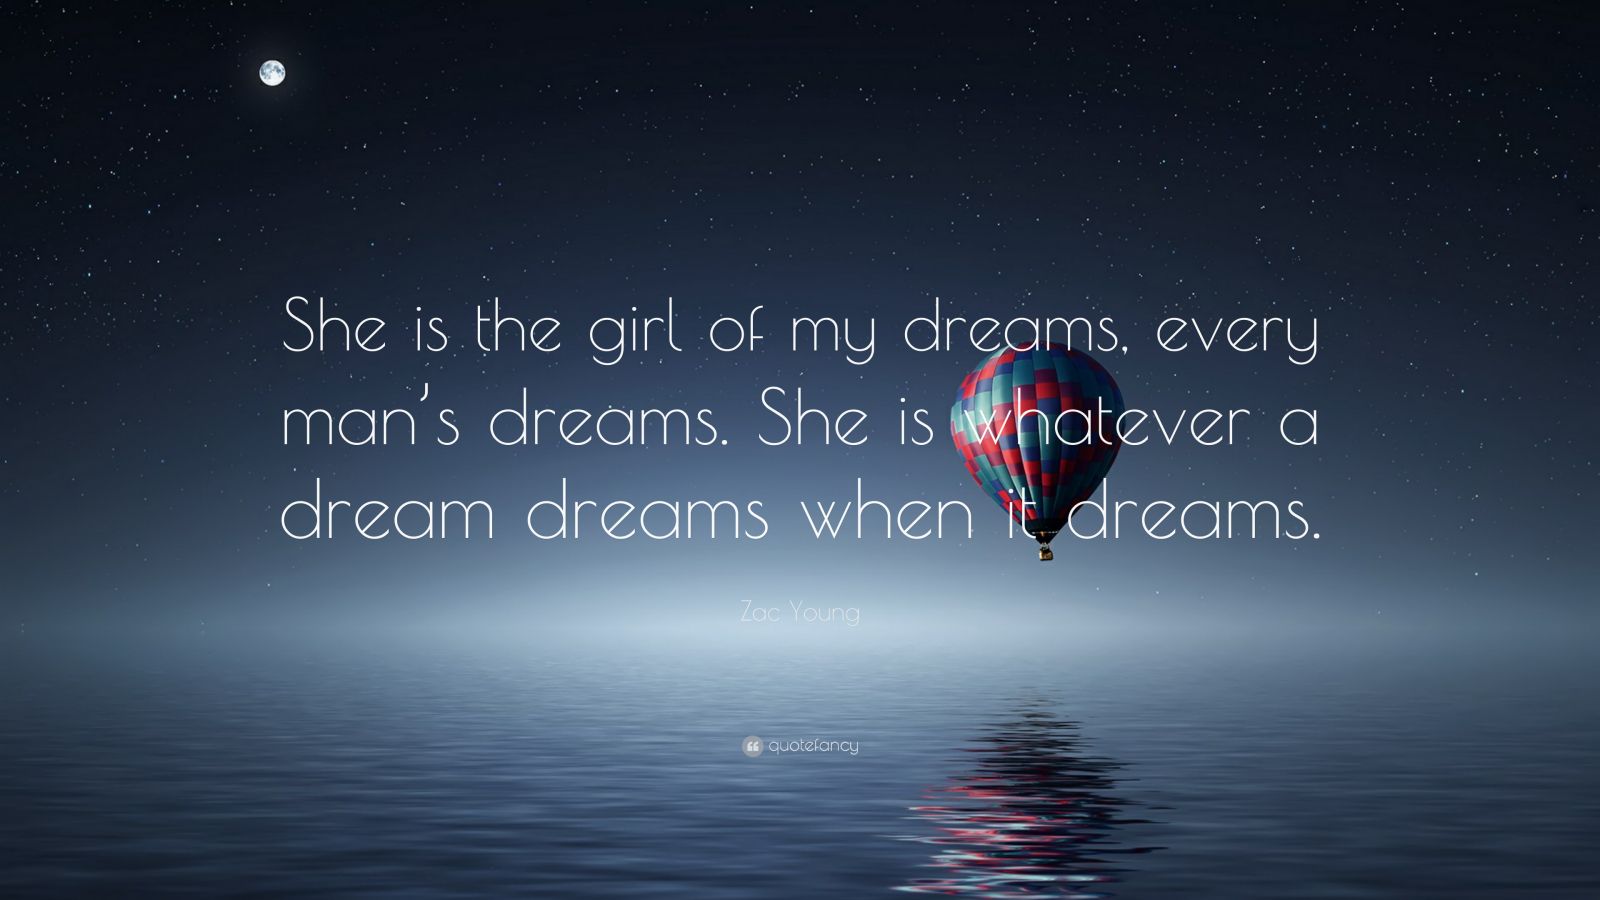 Zac Young Quote: “She is the girl of my dreams, every man's dreams. She is  whatever a dream dreams when it dreams.”